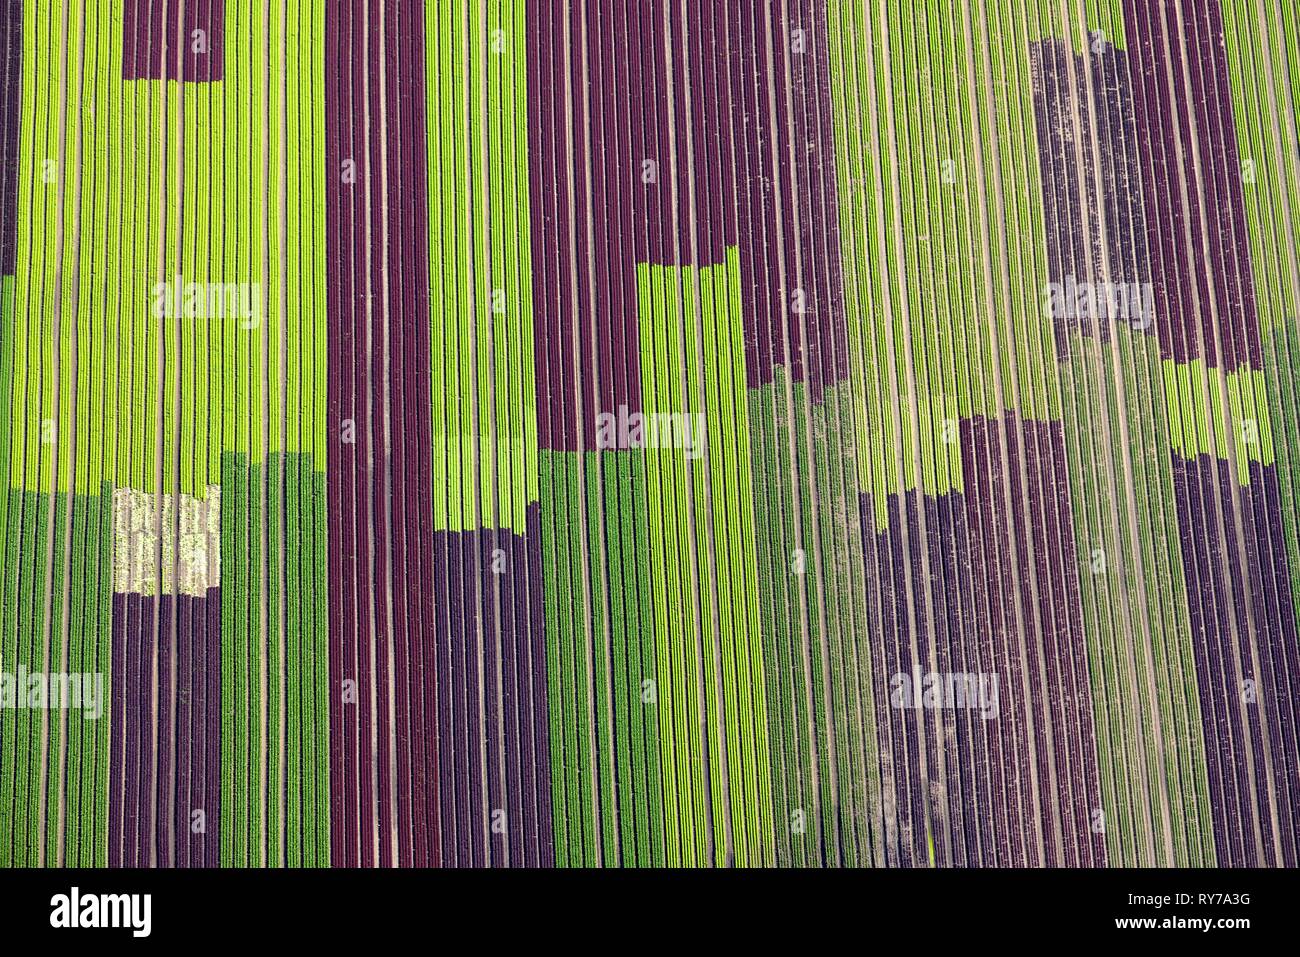 Salad fields, cultivation of red and green lettuce in rows, Schleswig-Holstein, Germany Stock Photo